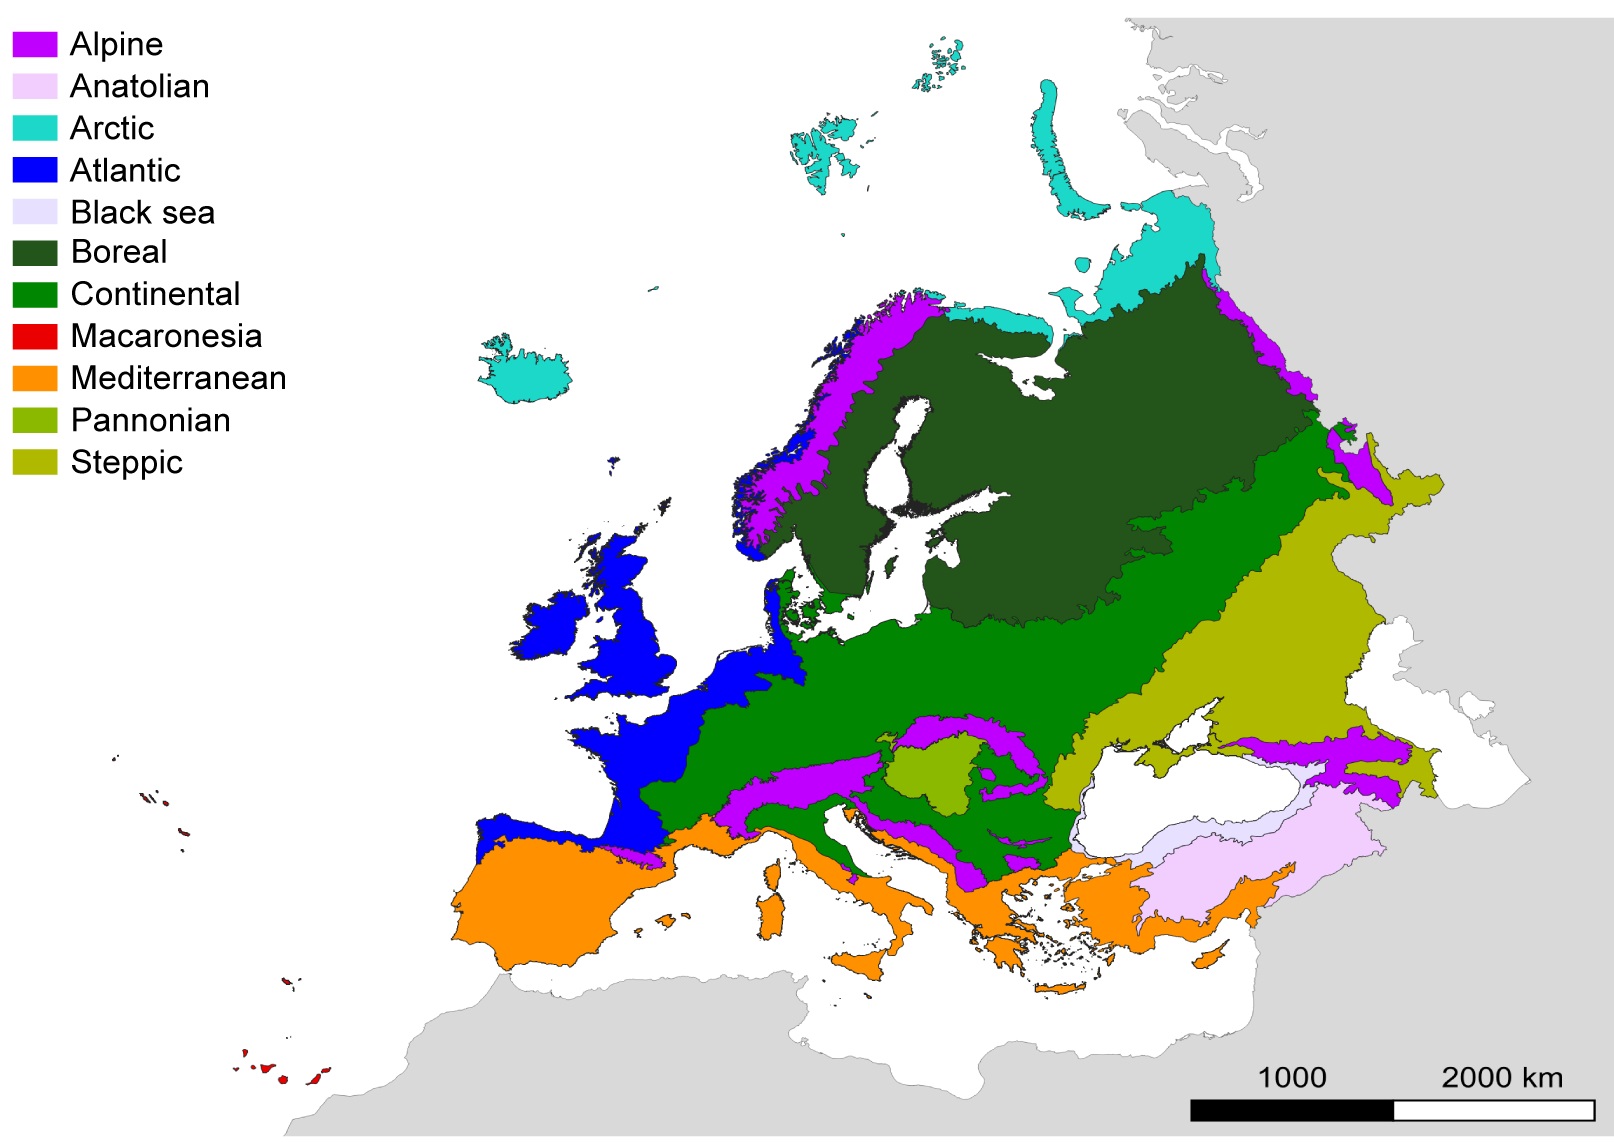 Outline map of Europe with different colours indicating the area covered by different biogeographical regions